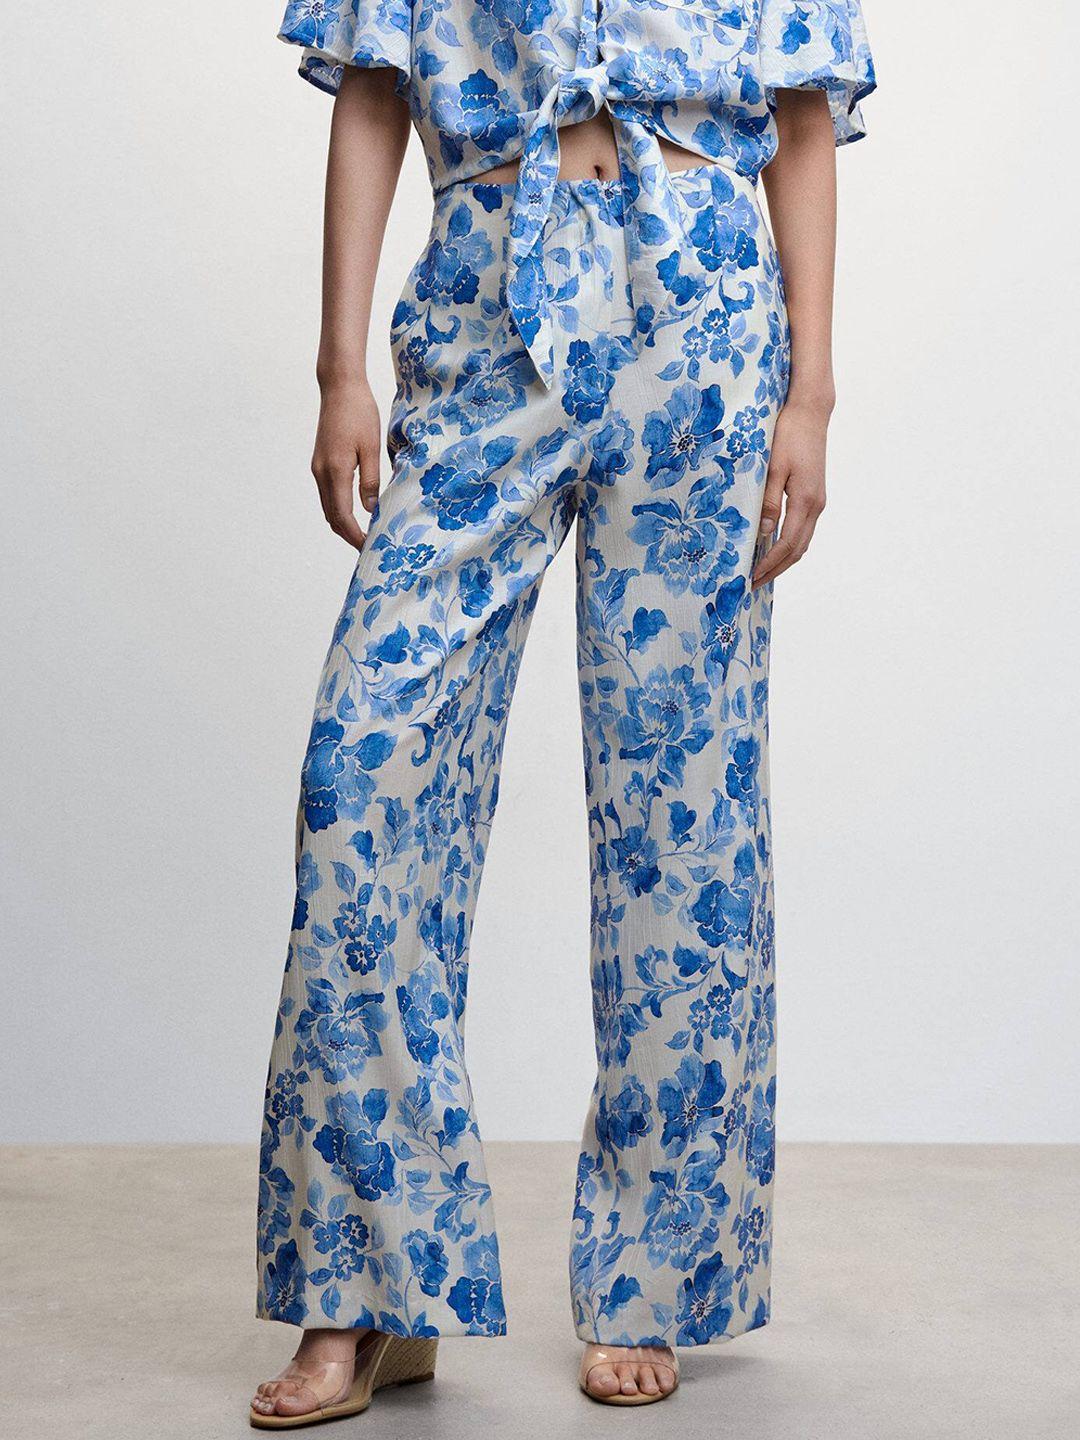 mango-women-floral-printed-trousers